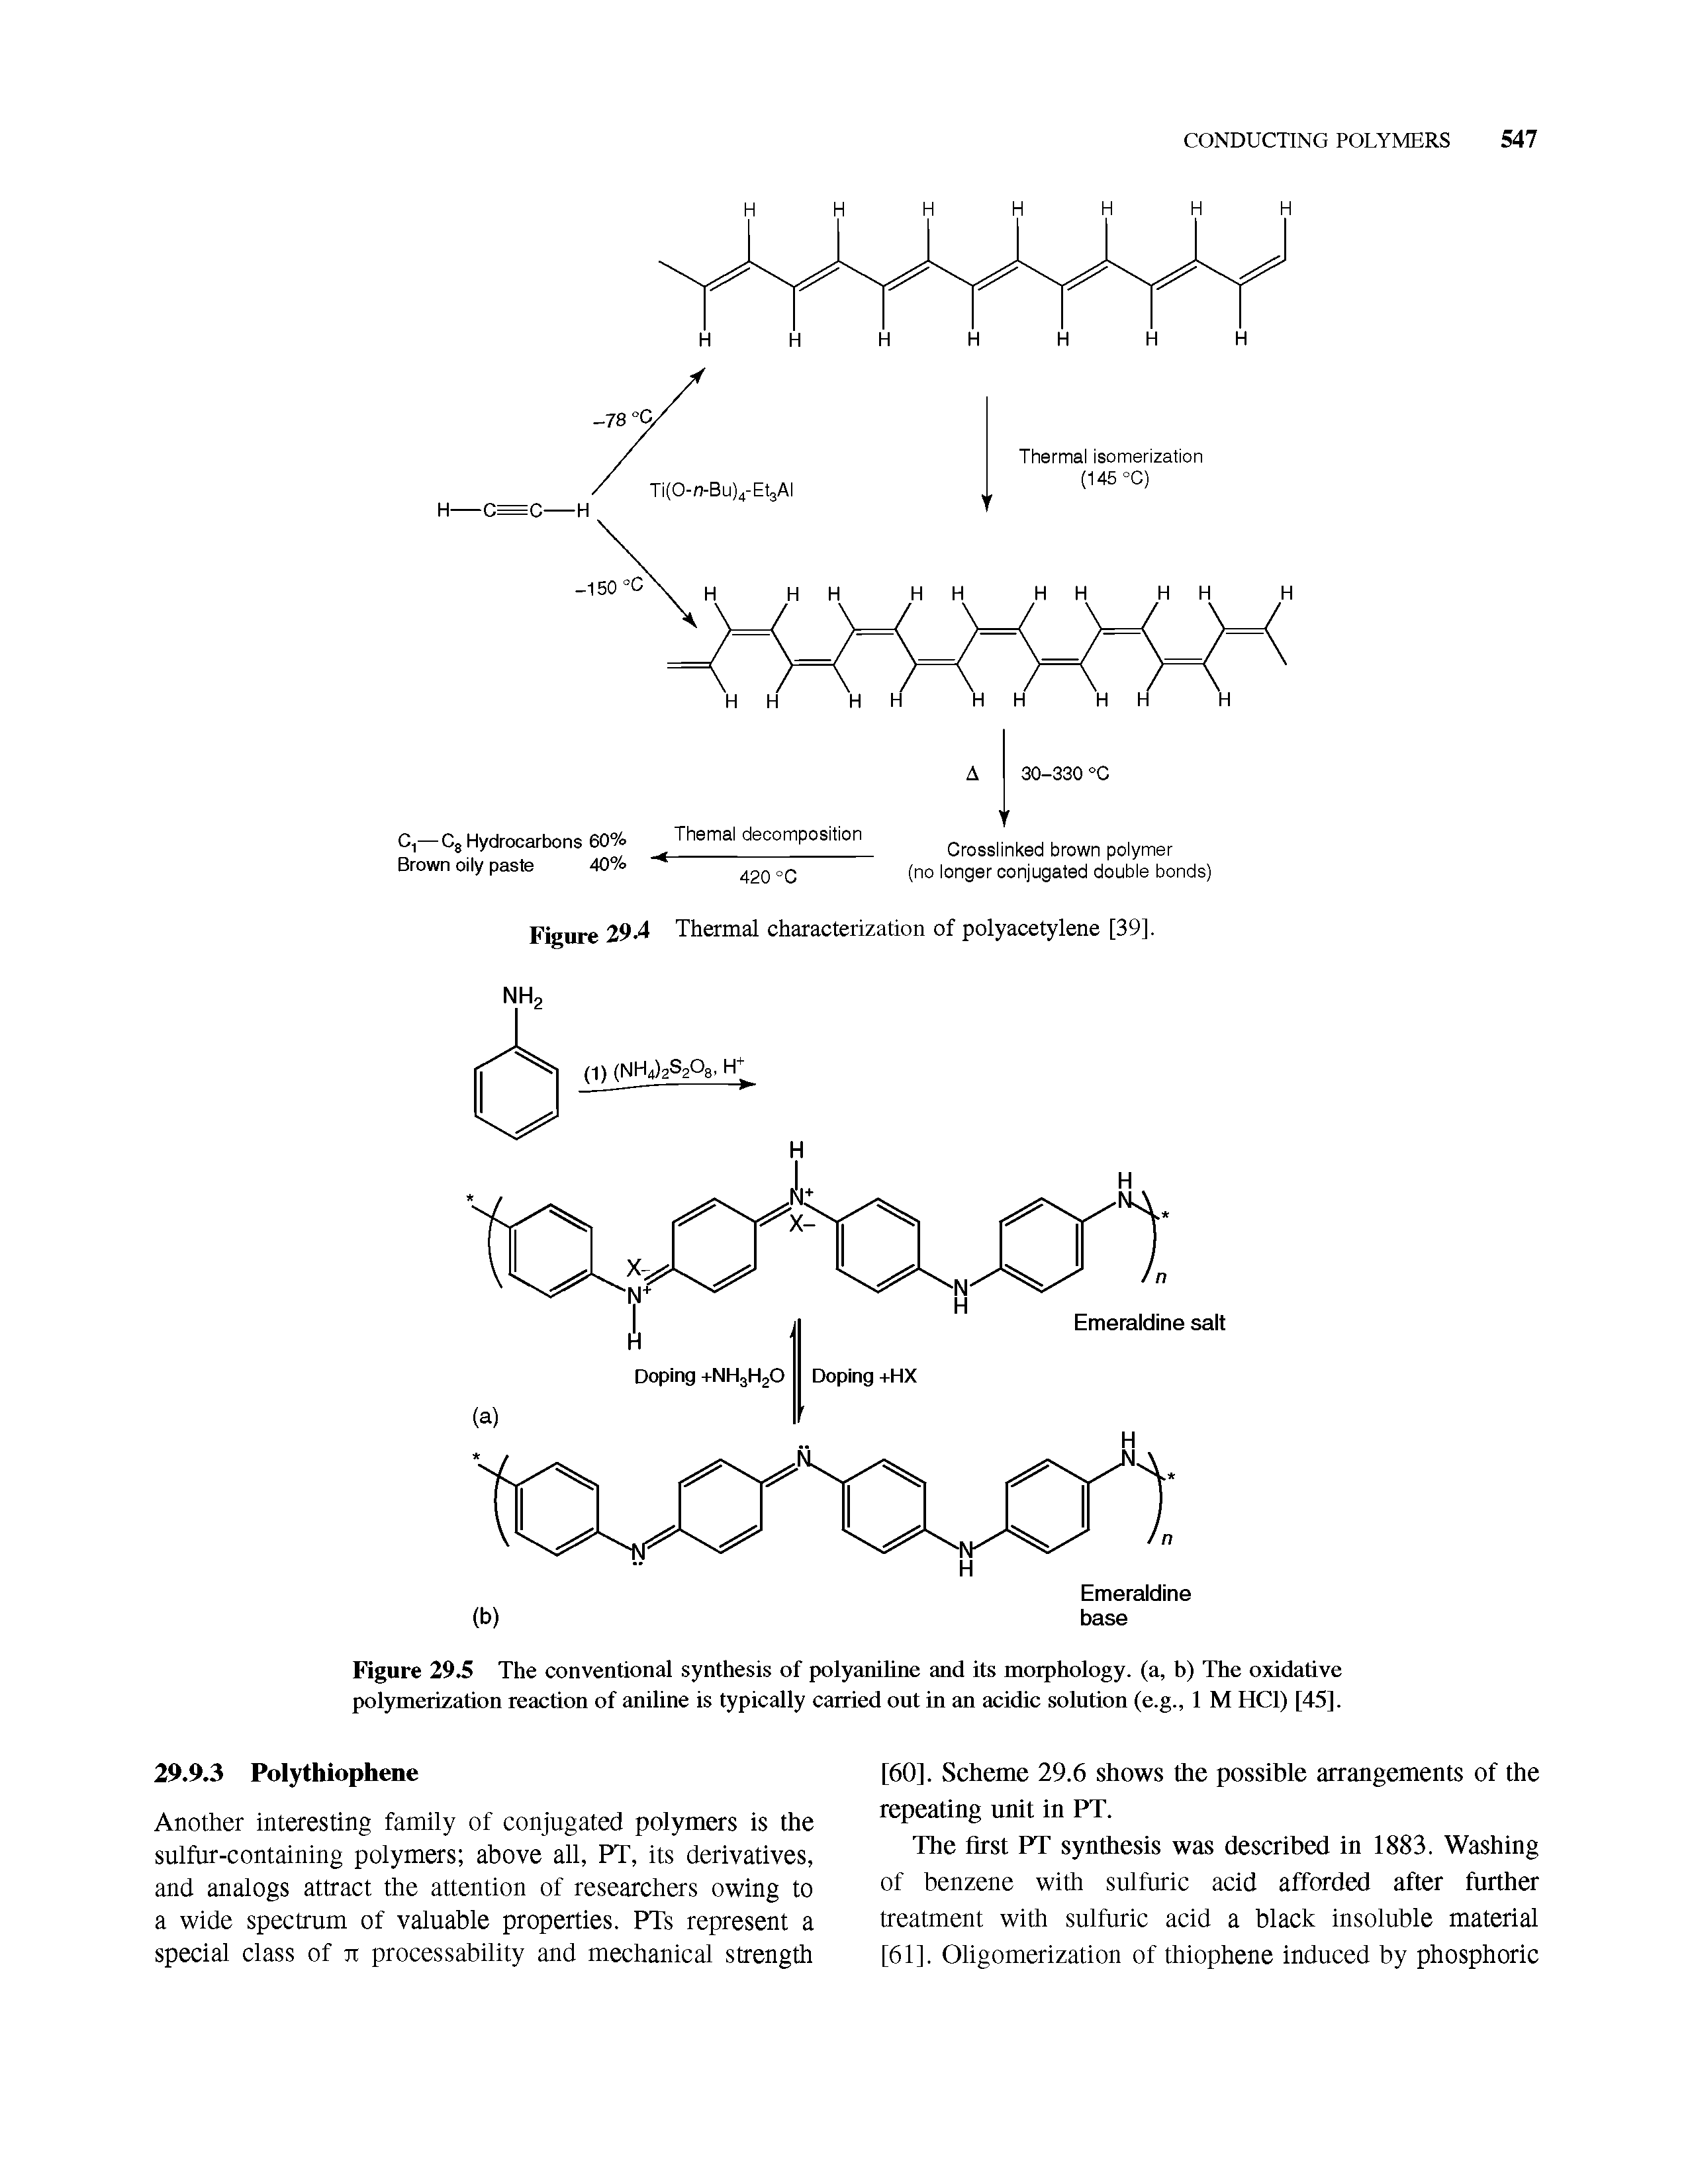 Figure 29.5 The conventional synthesis of polyaniline and its morphology, (a, b) The oxidative polymerization reaction of aniline is typically carried out in an acidic solution (e.g., 1 M HCl) [45].